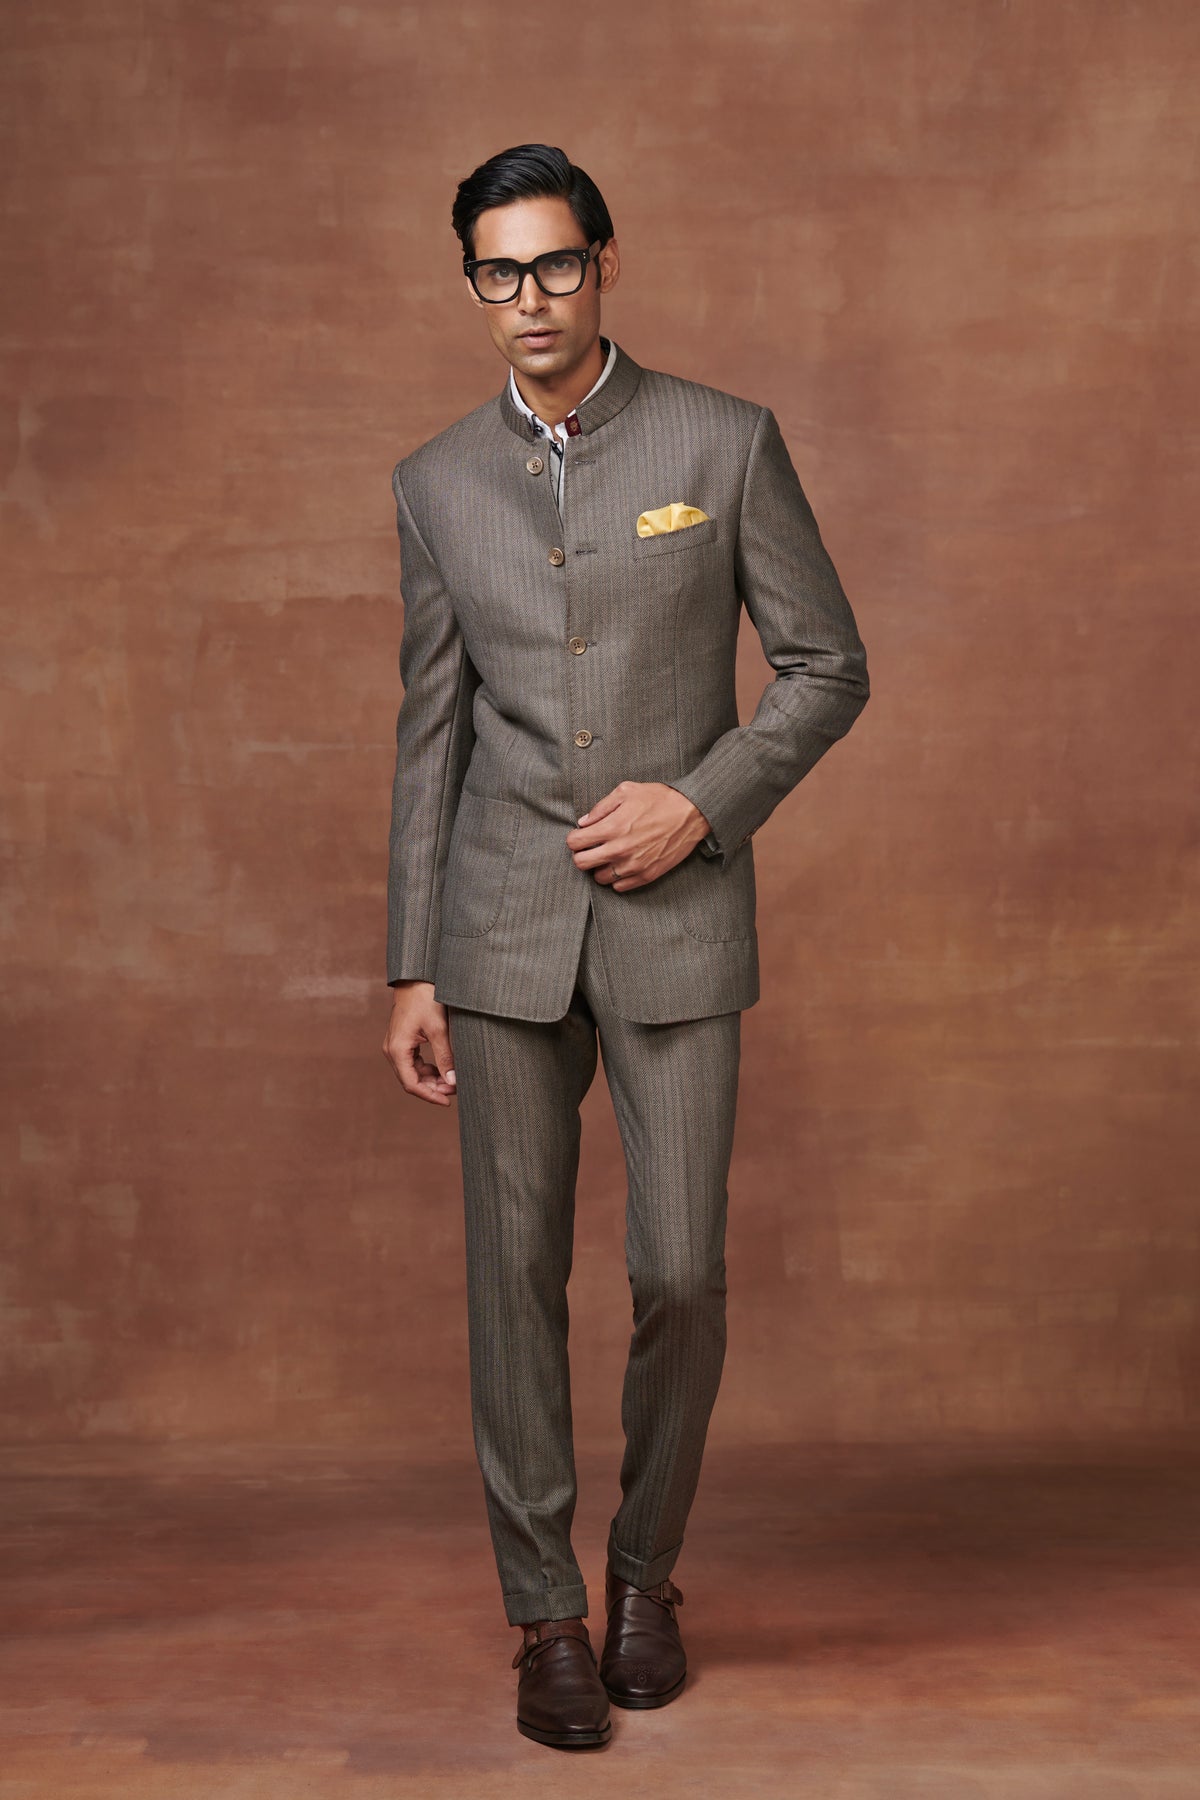 The Heritage Rr Bandhgala Suit